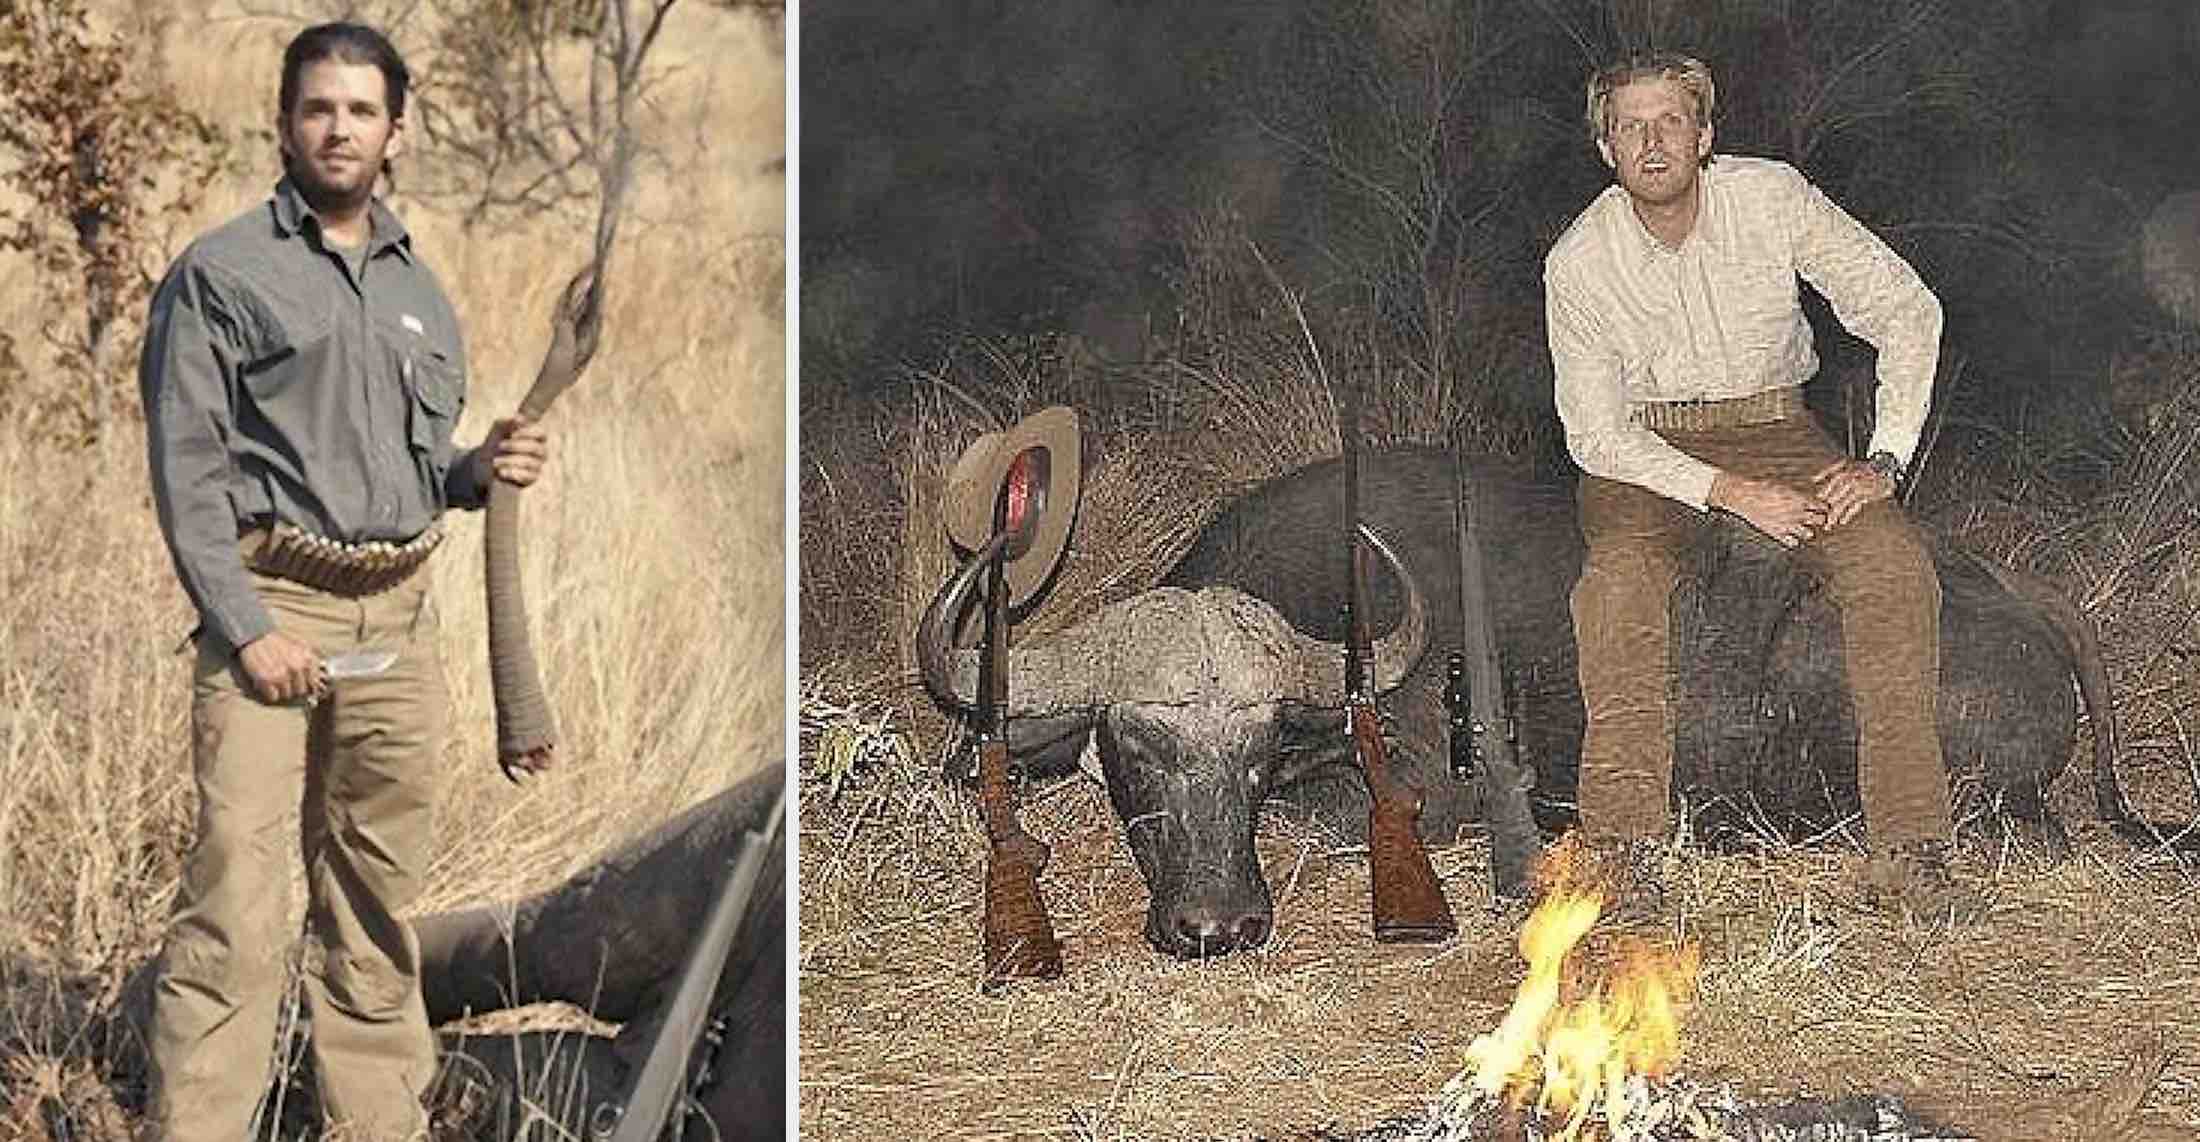 Trophy Hunting is for Idiots, The Controversy Surrounding Donald Trump Jr. and Eric Trump’s Trophy Hunting and the Ethics, Conservation, and Public Outcry